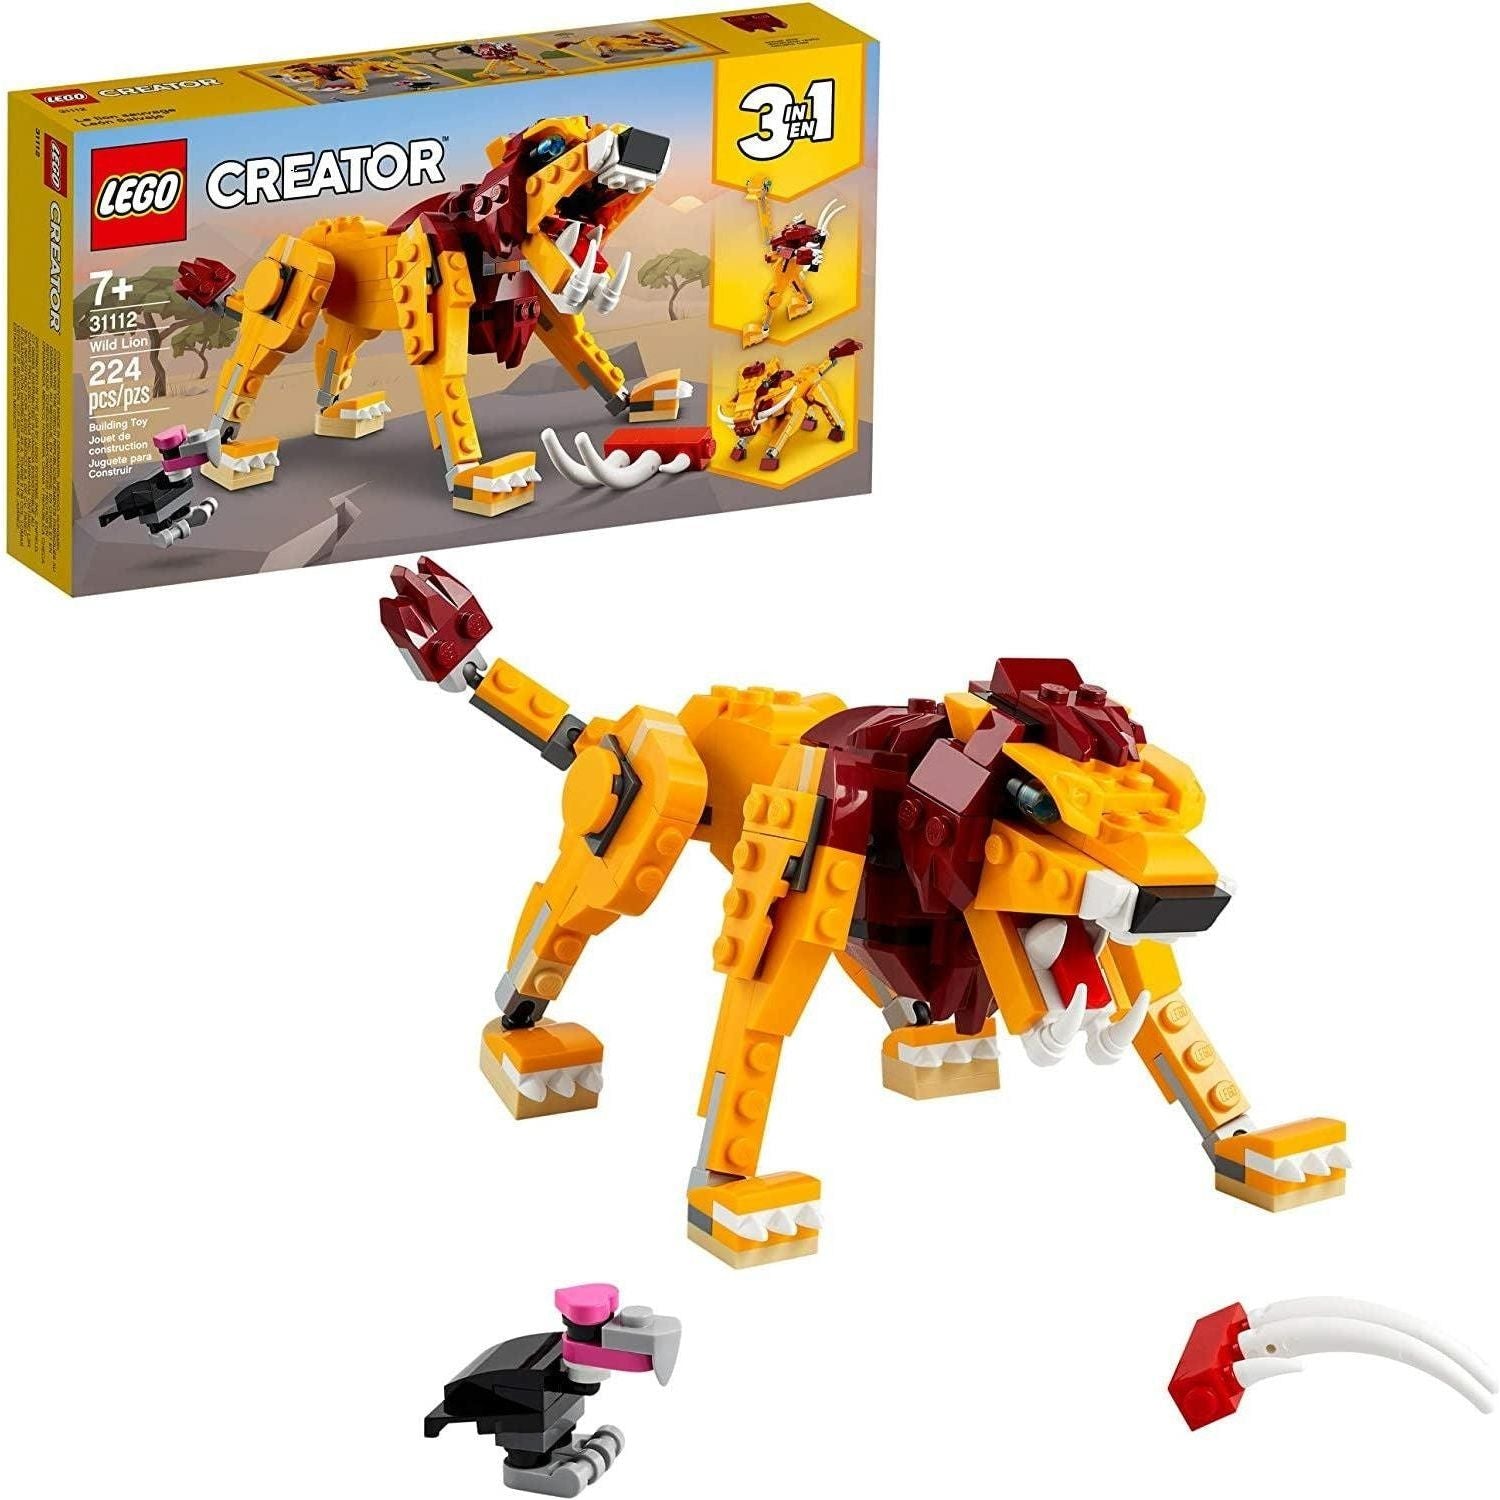 LEGO Creator 3in1 Wild Lion 31112 3in1 Toy Building Kit Featuring Animal Toys (224 Pieces) - BumbleToys - 8-13 Years, Boys, Creator 3In1, LEGO, OXE, Pre-Order